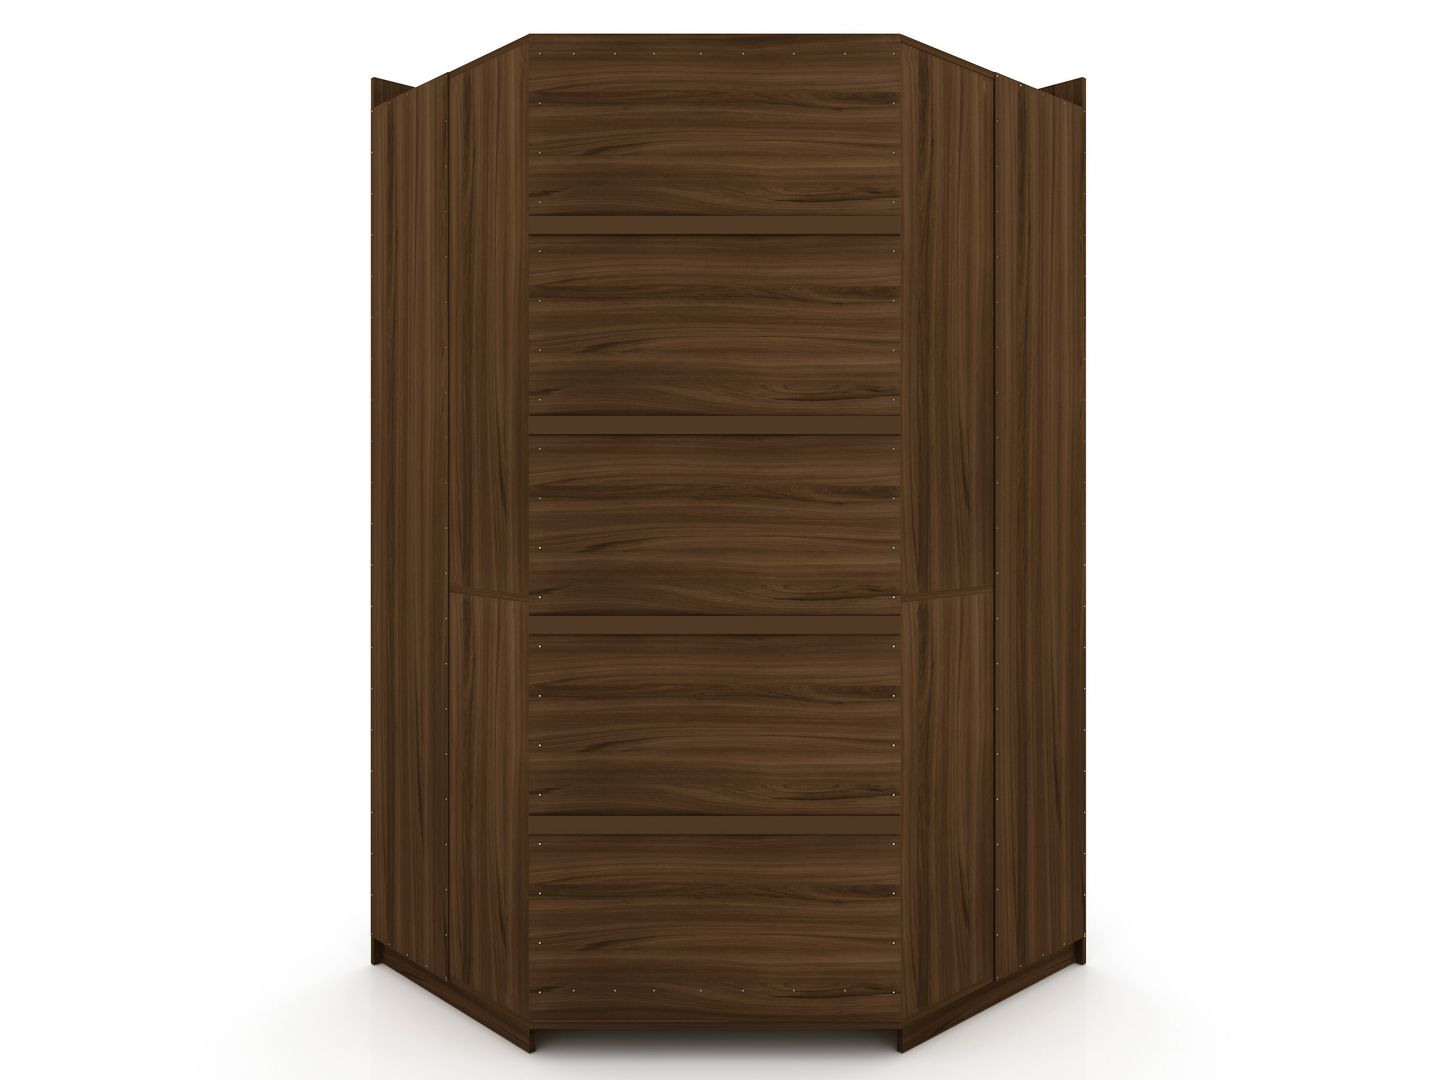 Manhattan Comfort Mulberry Open 3 Sectional Modern Wardrobe Corner Closet with 4 Drawers - Set of 3 in Brown